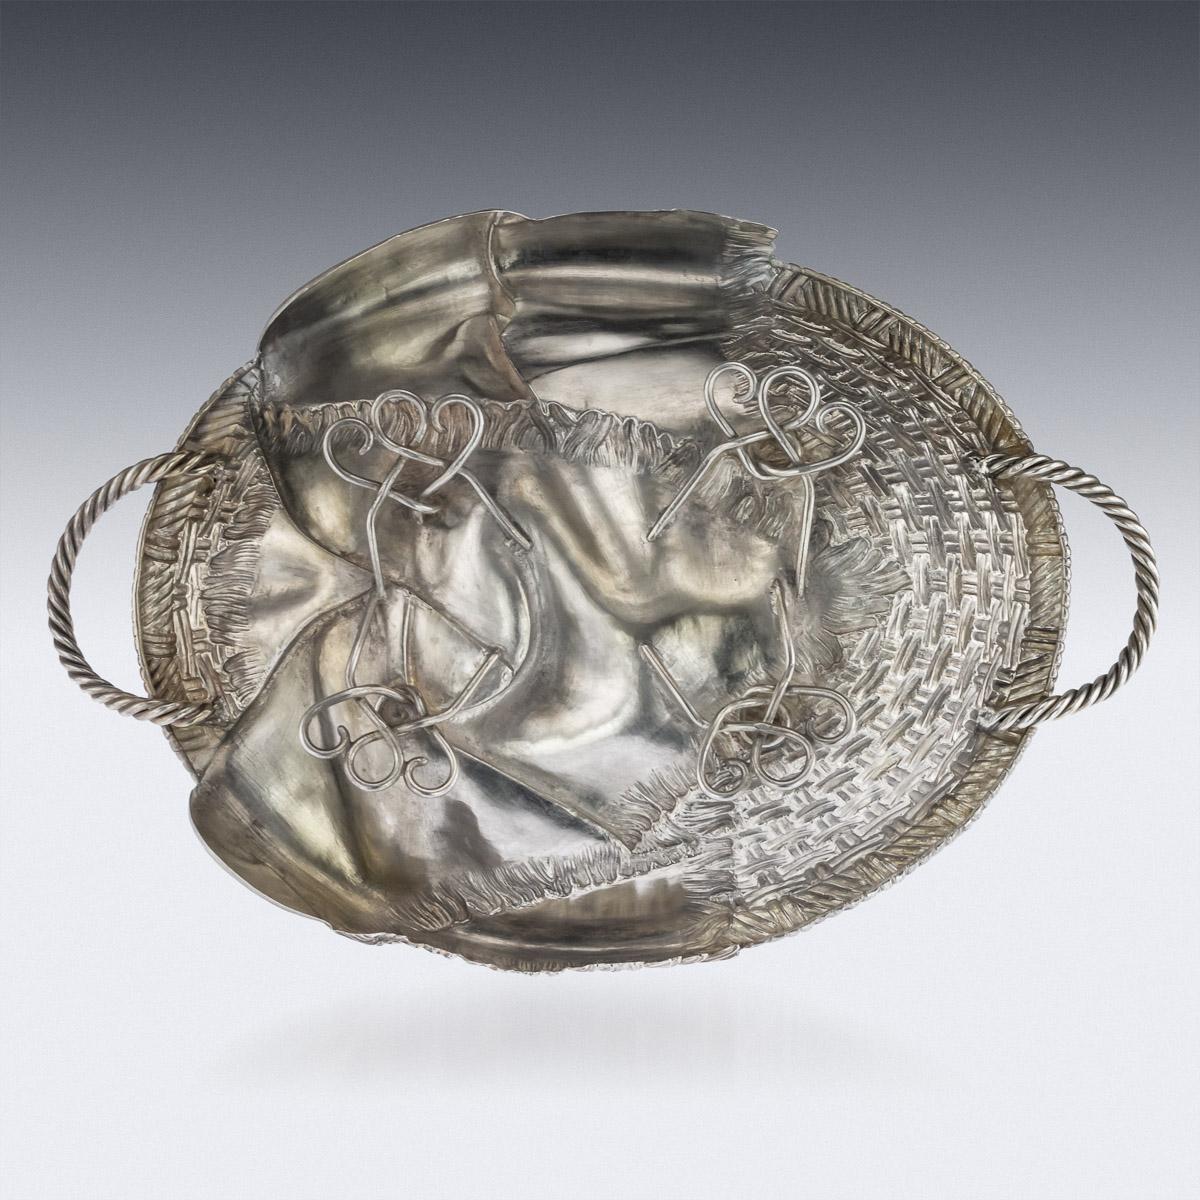 Antique 19th century Russian solid silver trompe l'oeil bread basket, very large and of heavy gauge, of oval form, embellished with a fringed cloth, flanked by a pair of ropetwist handles and raised on wirework feet. Hallmarked Russian Silver 84